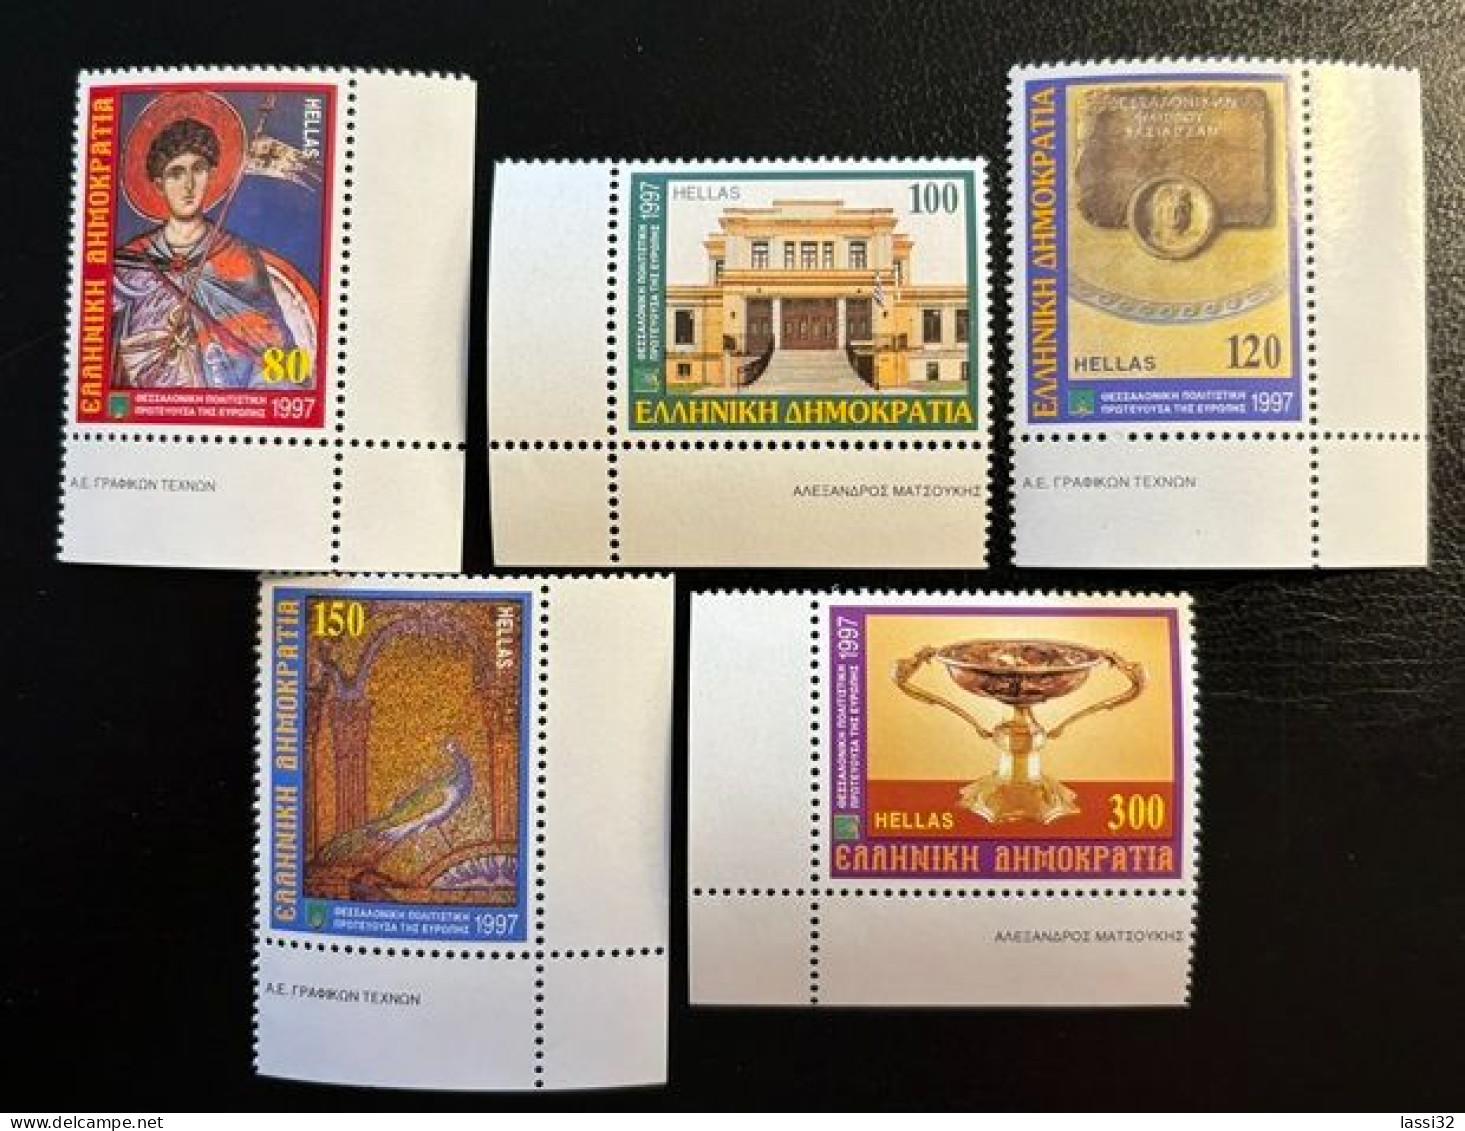 GREECE,1997, THESSALONIKI CULTURAL CAPITAL, MNH - Unused Stamps